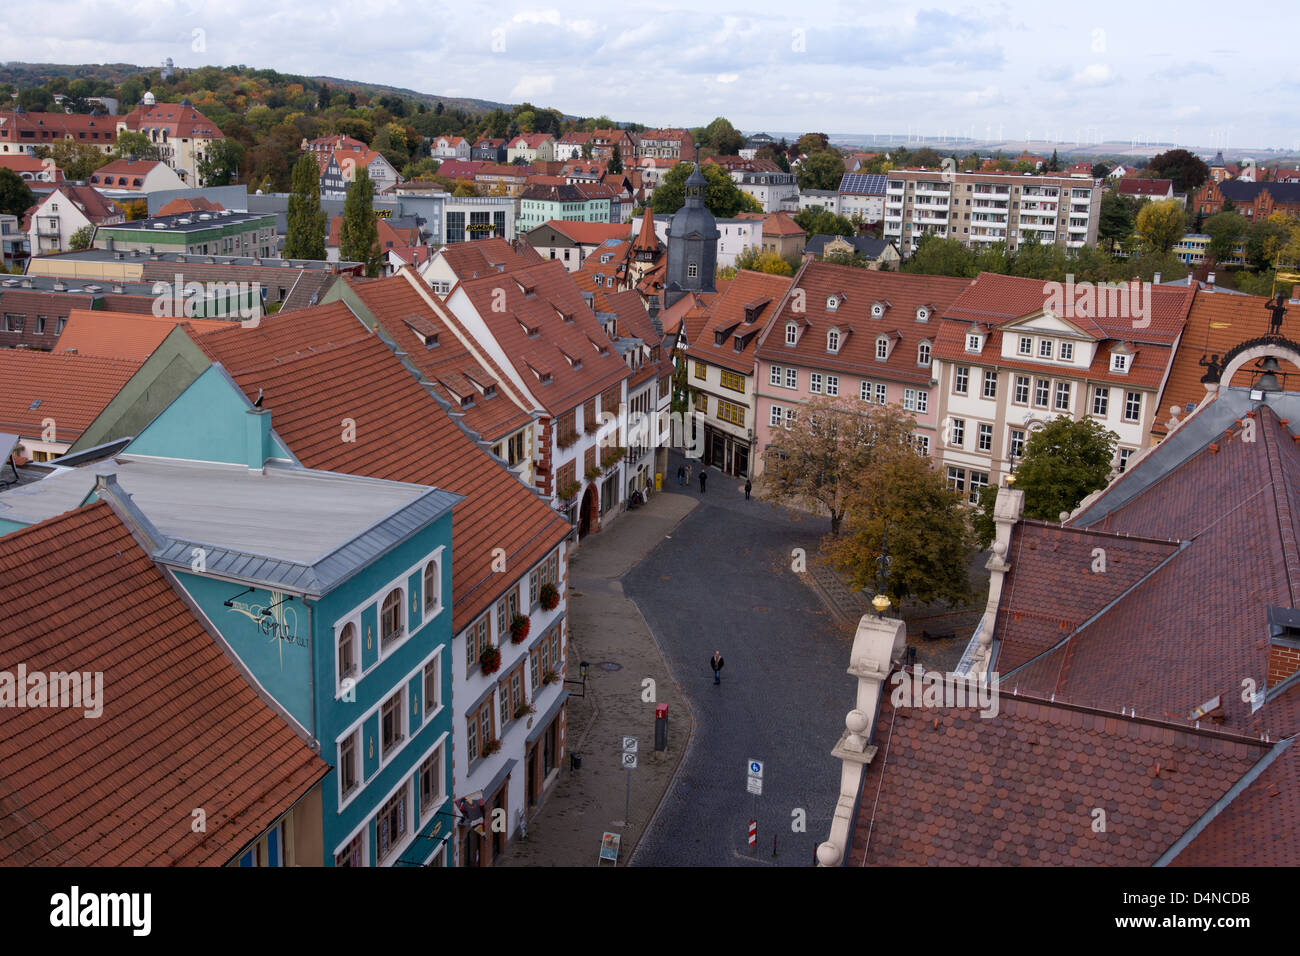 View from the town hall tower towards Gotha, Thuringia, Germany, Europe Stock Photo